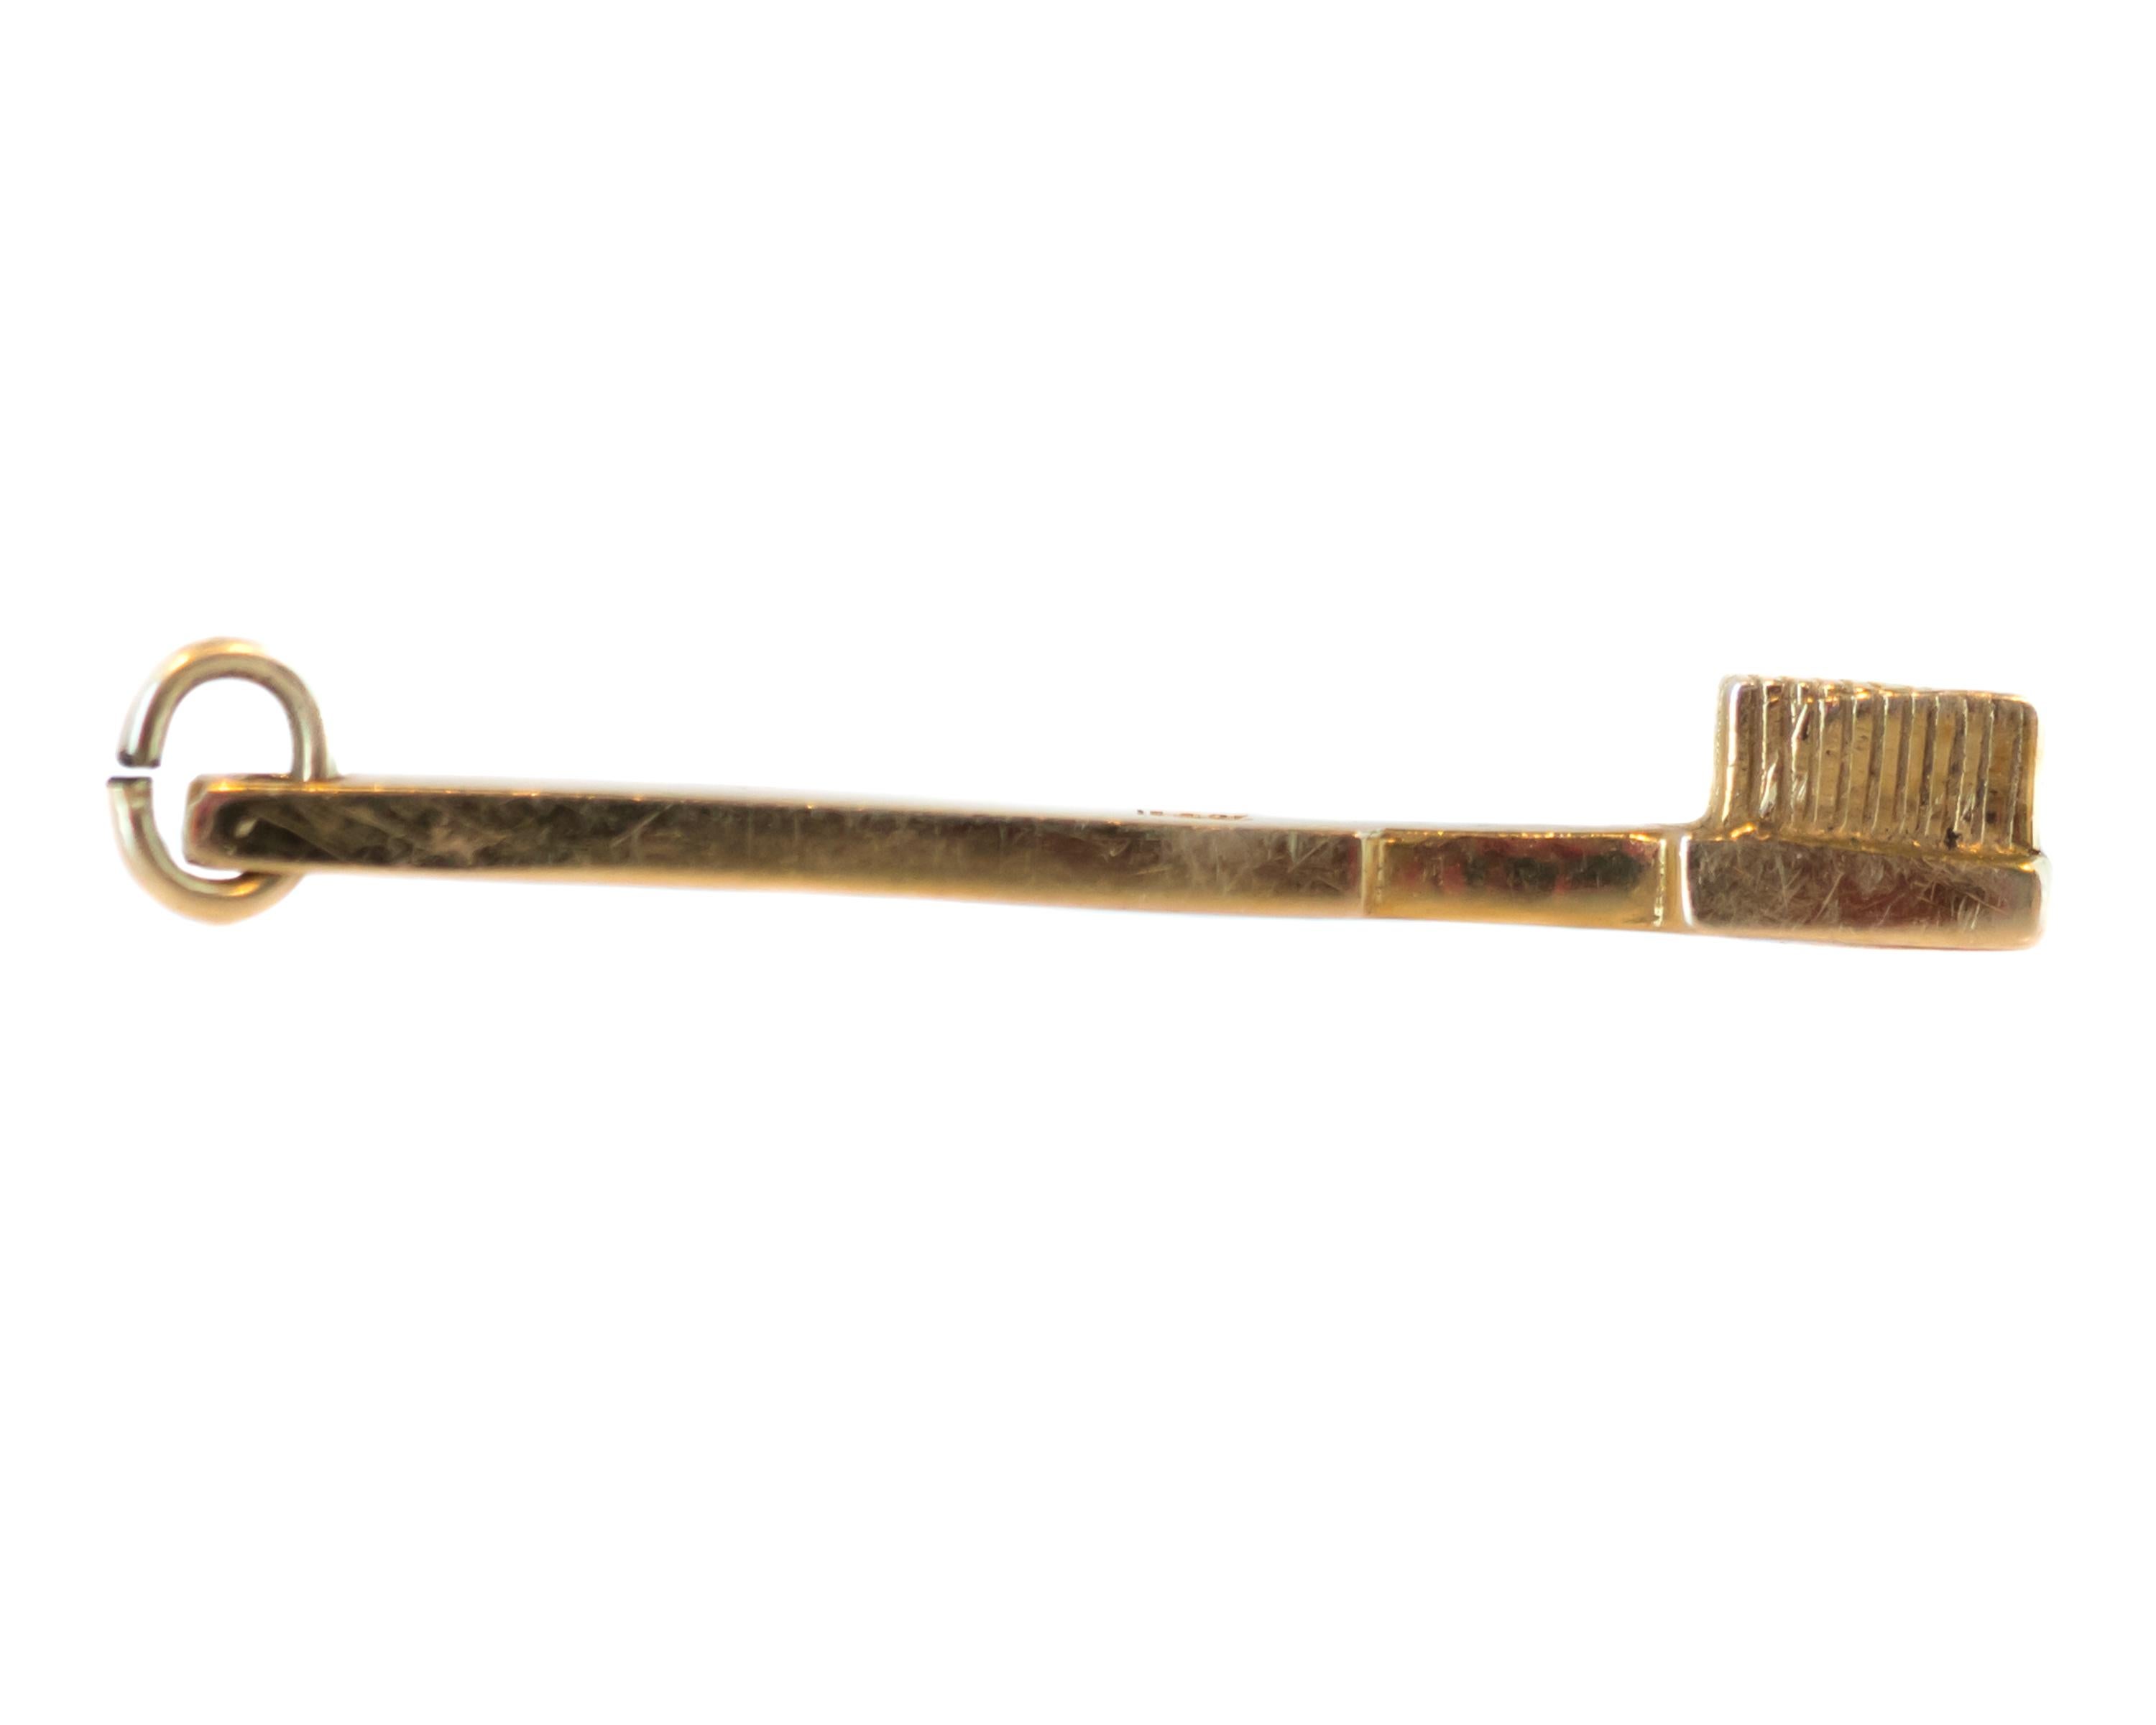 1930s Toothbrush Charm - 14 Karat Yellow Gold

Features:
14 Karat Yellow Gold Solid Construction
Bristle Detail on Head
Long Handle with bail loop 
Shiny, Rich Gold

Toothbrush measures 32 x 2.5 millimeters

Charm Details:
Metal: 14 Karat Yellow